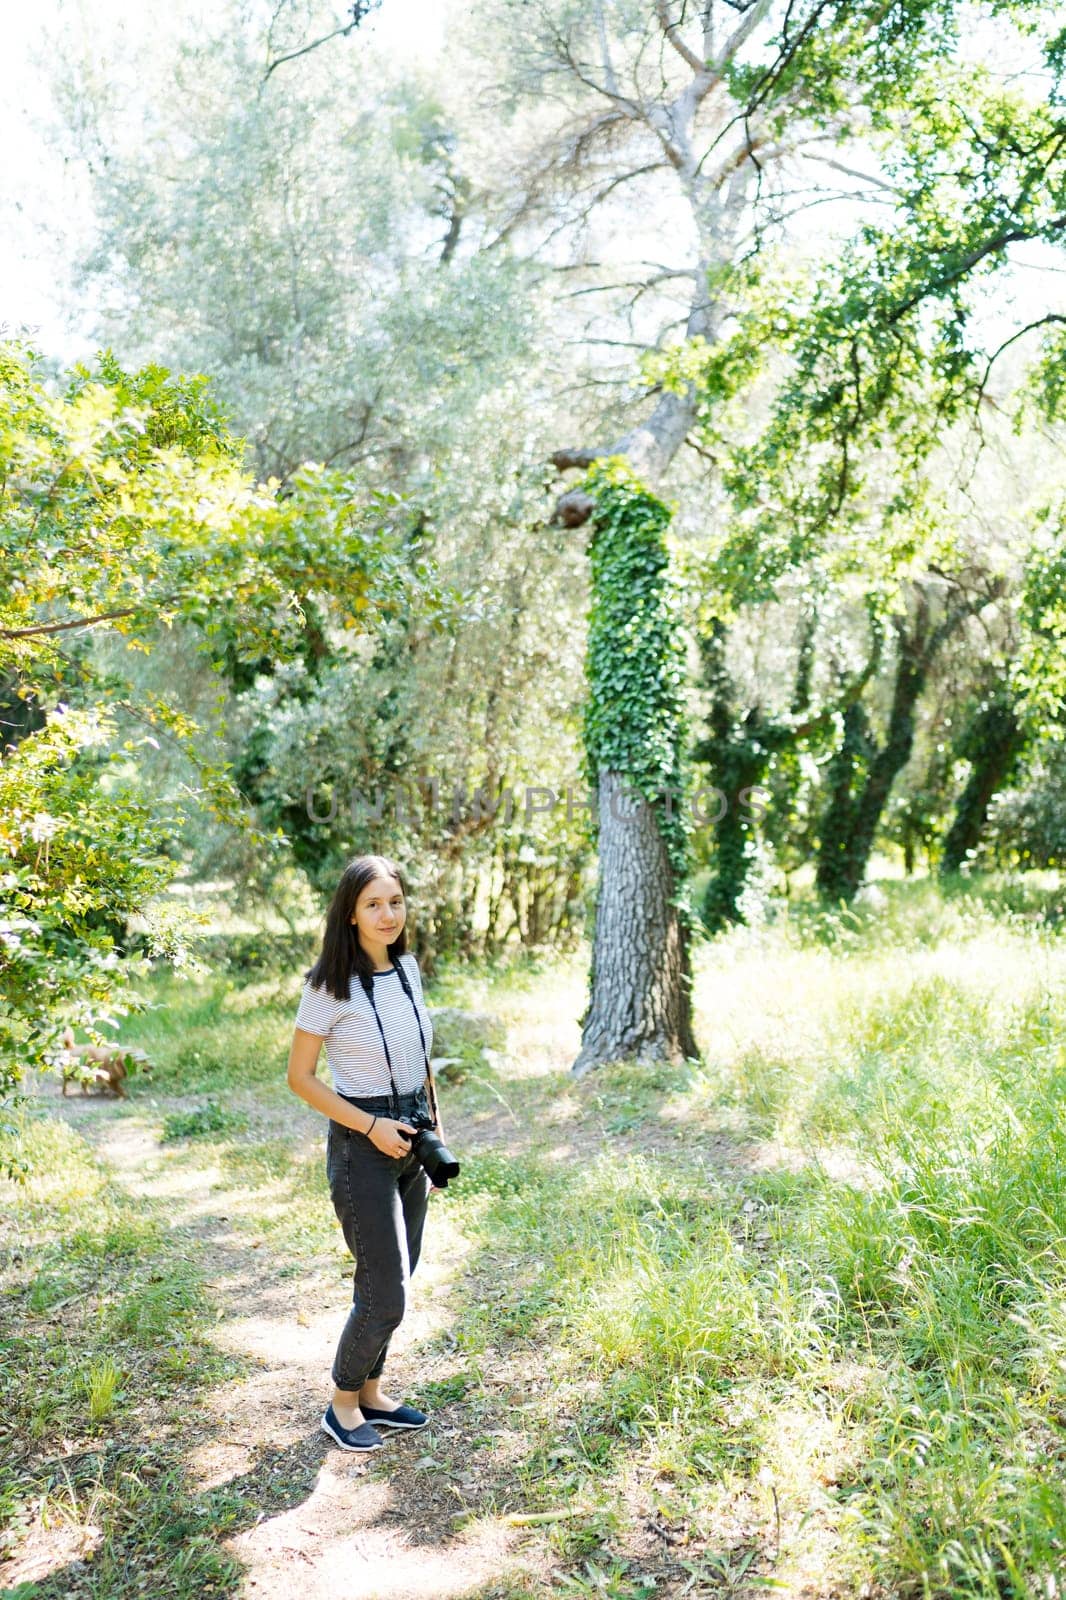 Photographer girl stands with a camera on a strap around her neck in the garden by Nadtochiy